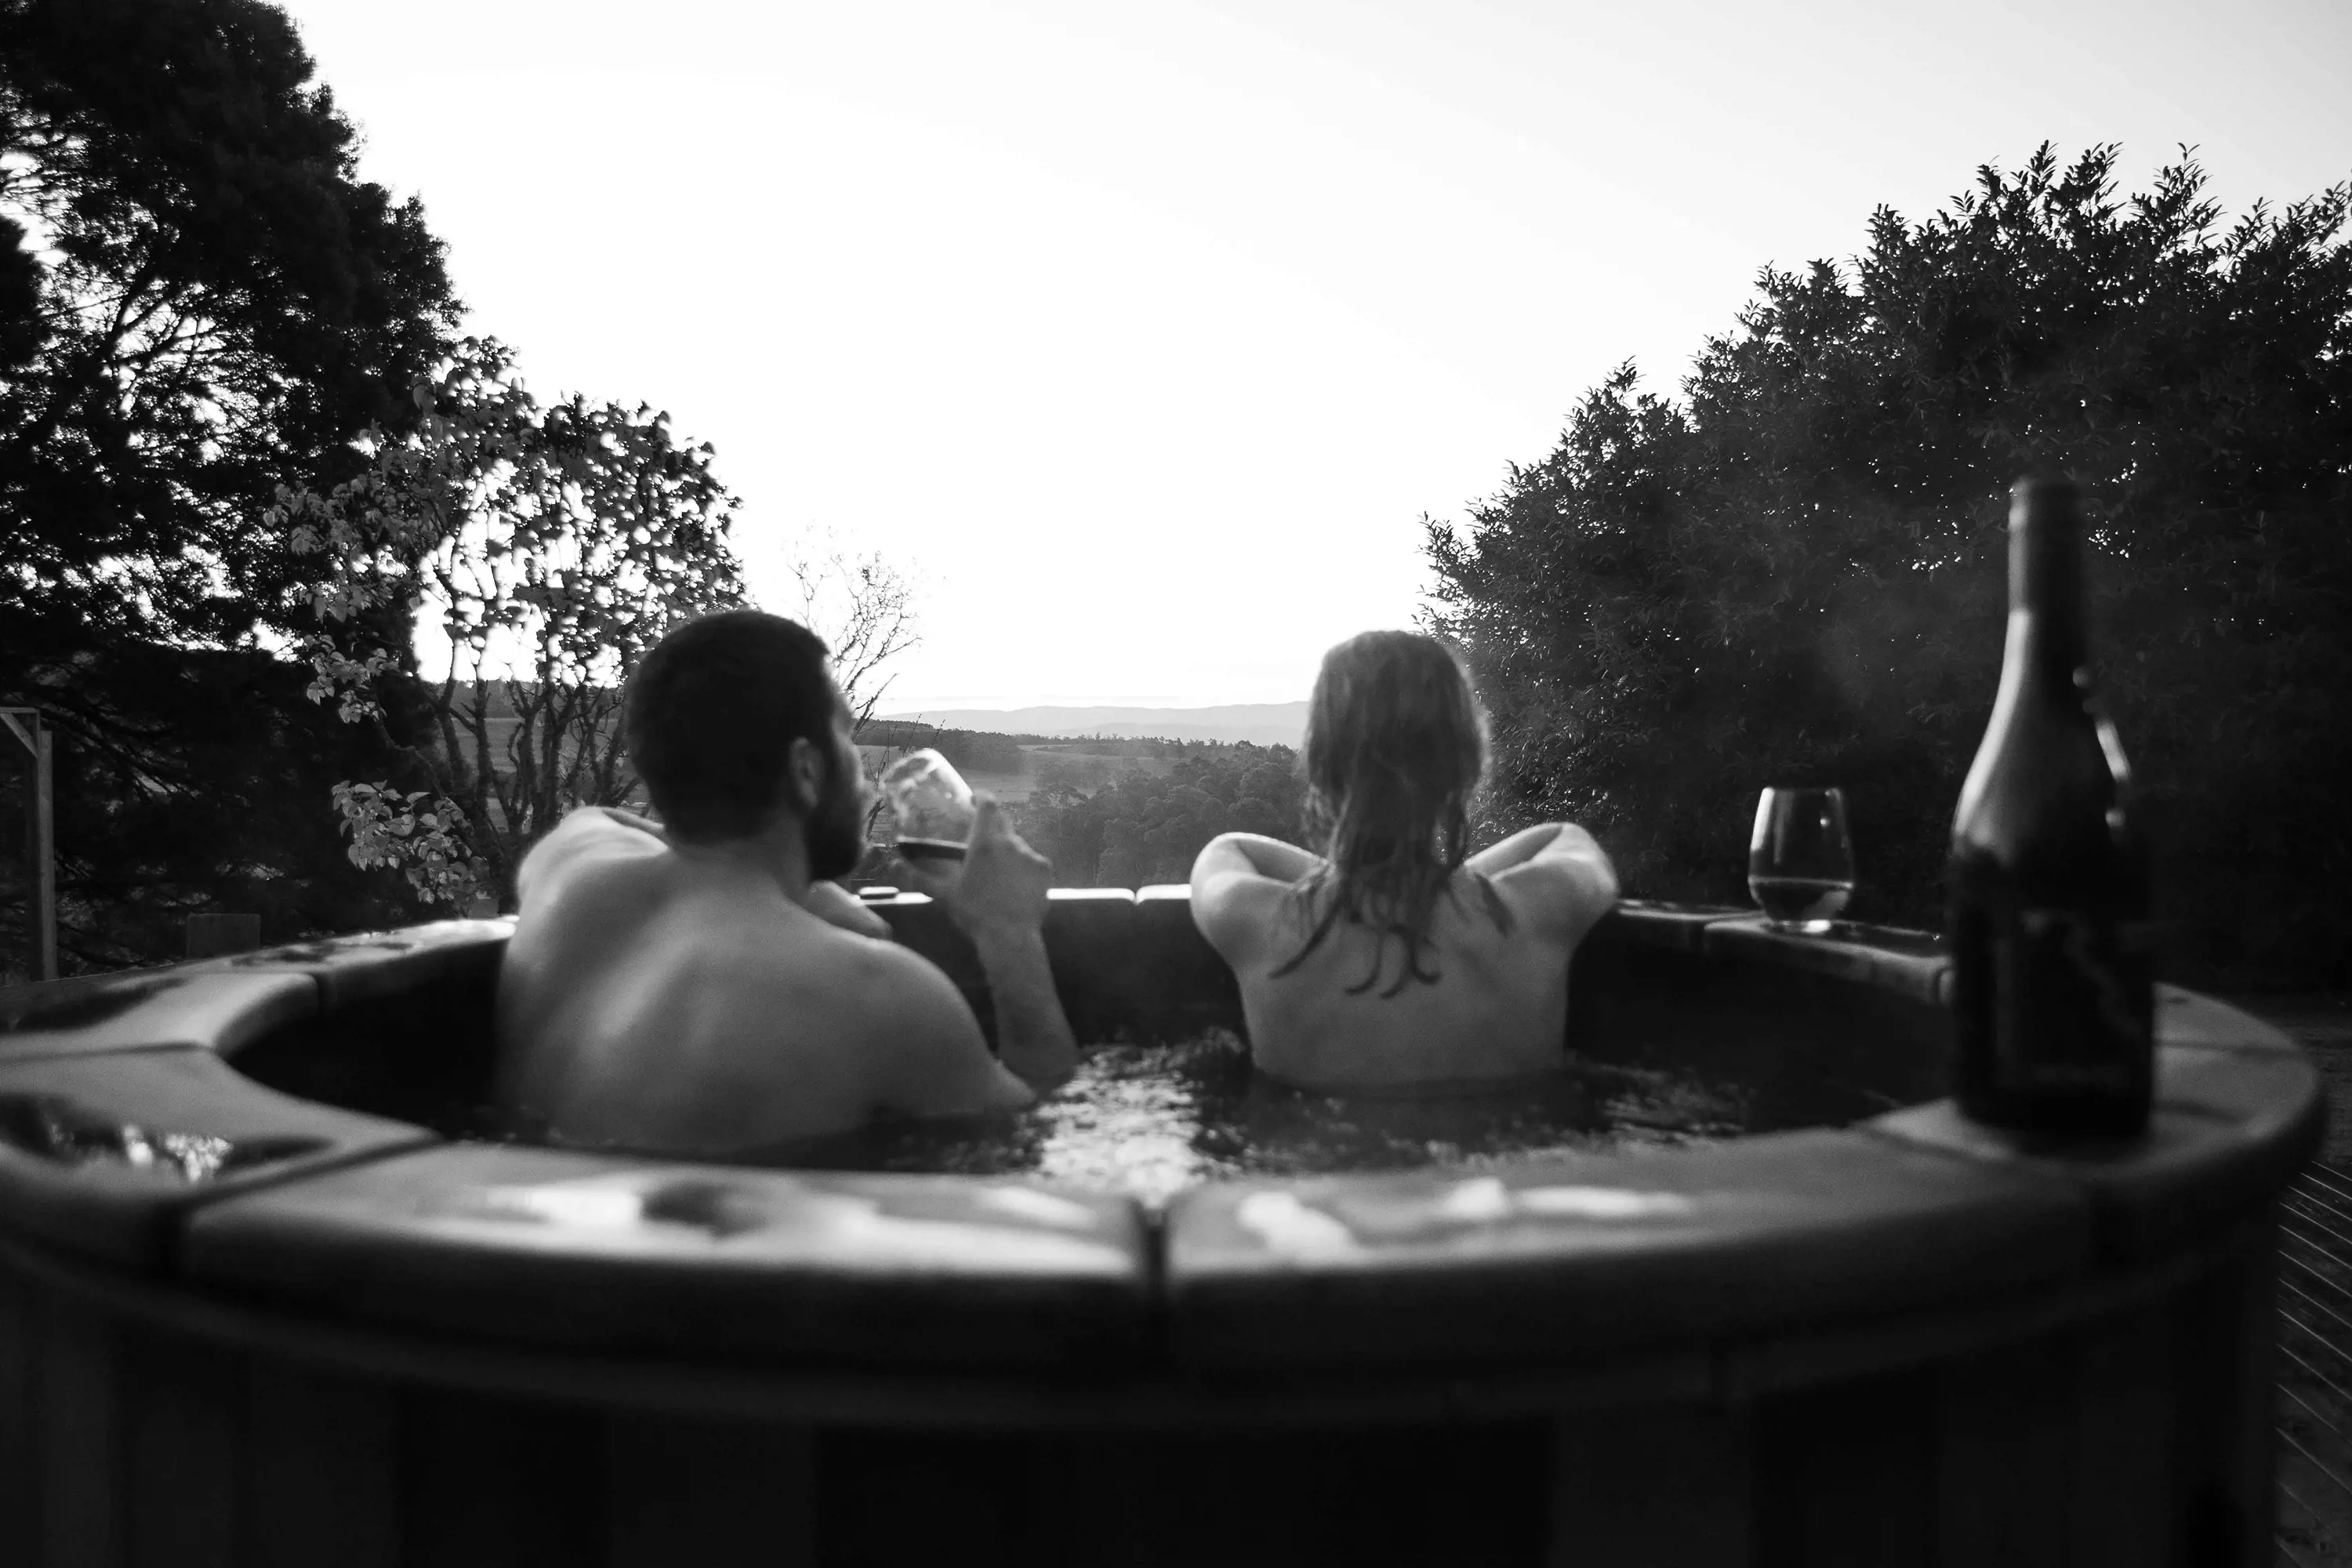 Couple in an outdoor wooden hot tub, drinking wine and taking in the view.